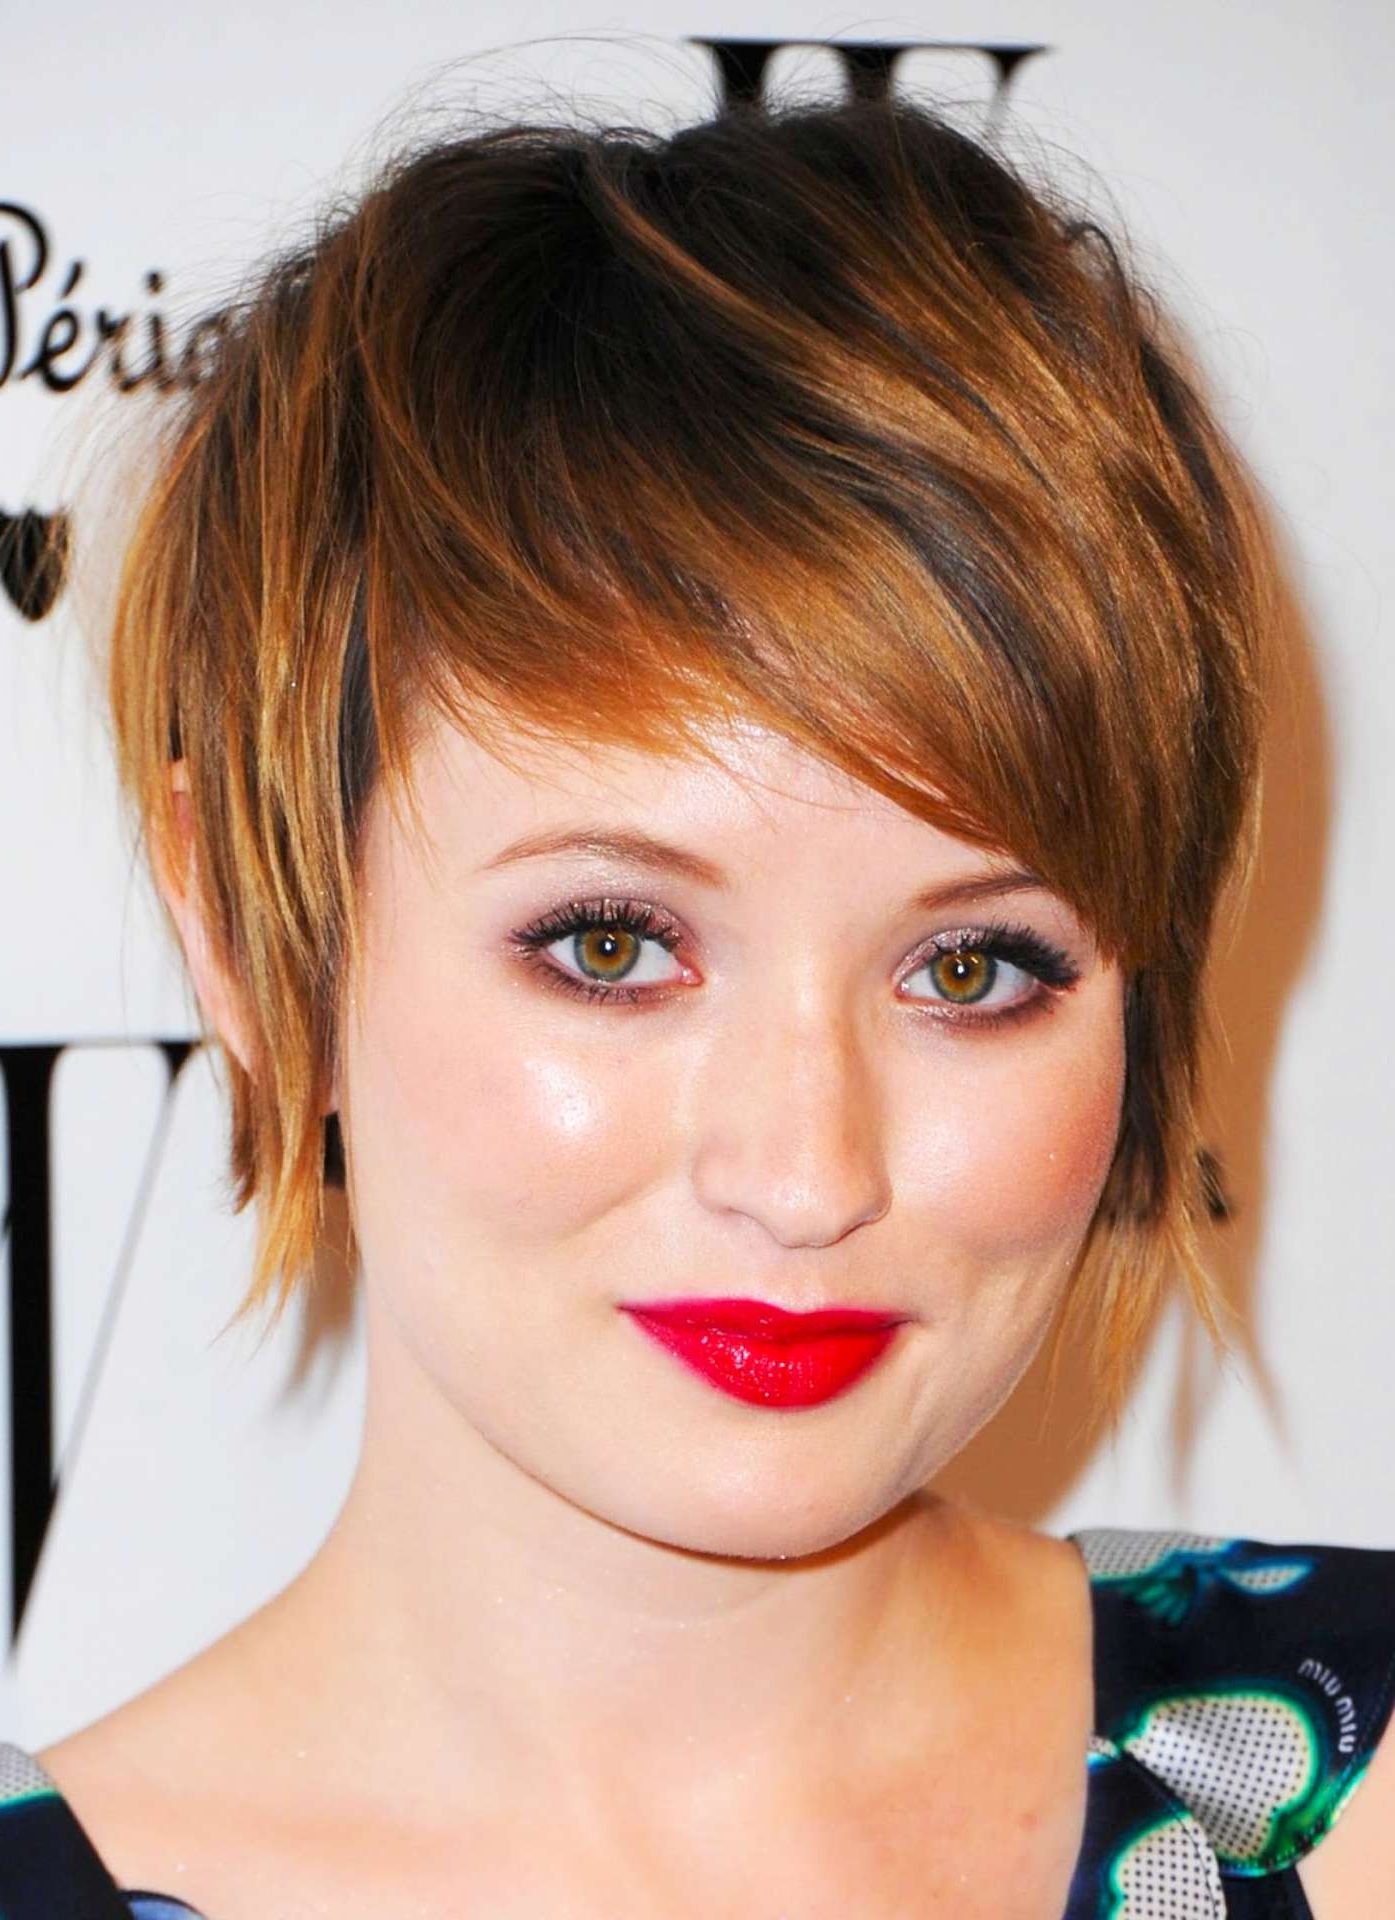 14 Best Short Haircuts For Women With Round Faces Regarding Short Hairstyles For Heavy Round Faces (View 3 of 25)